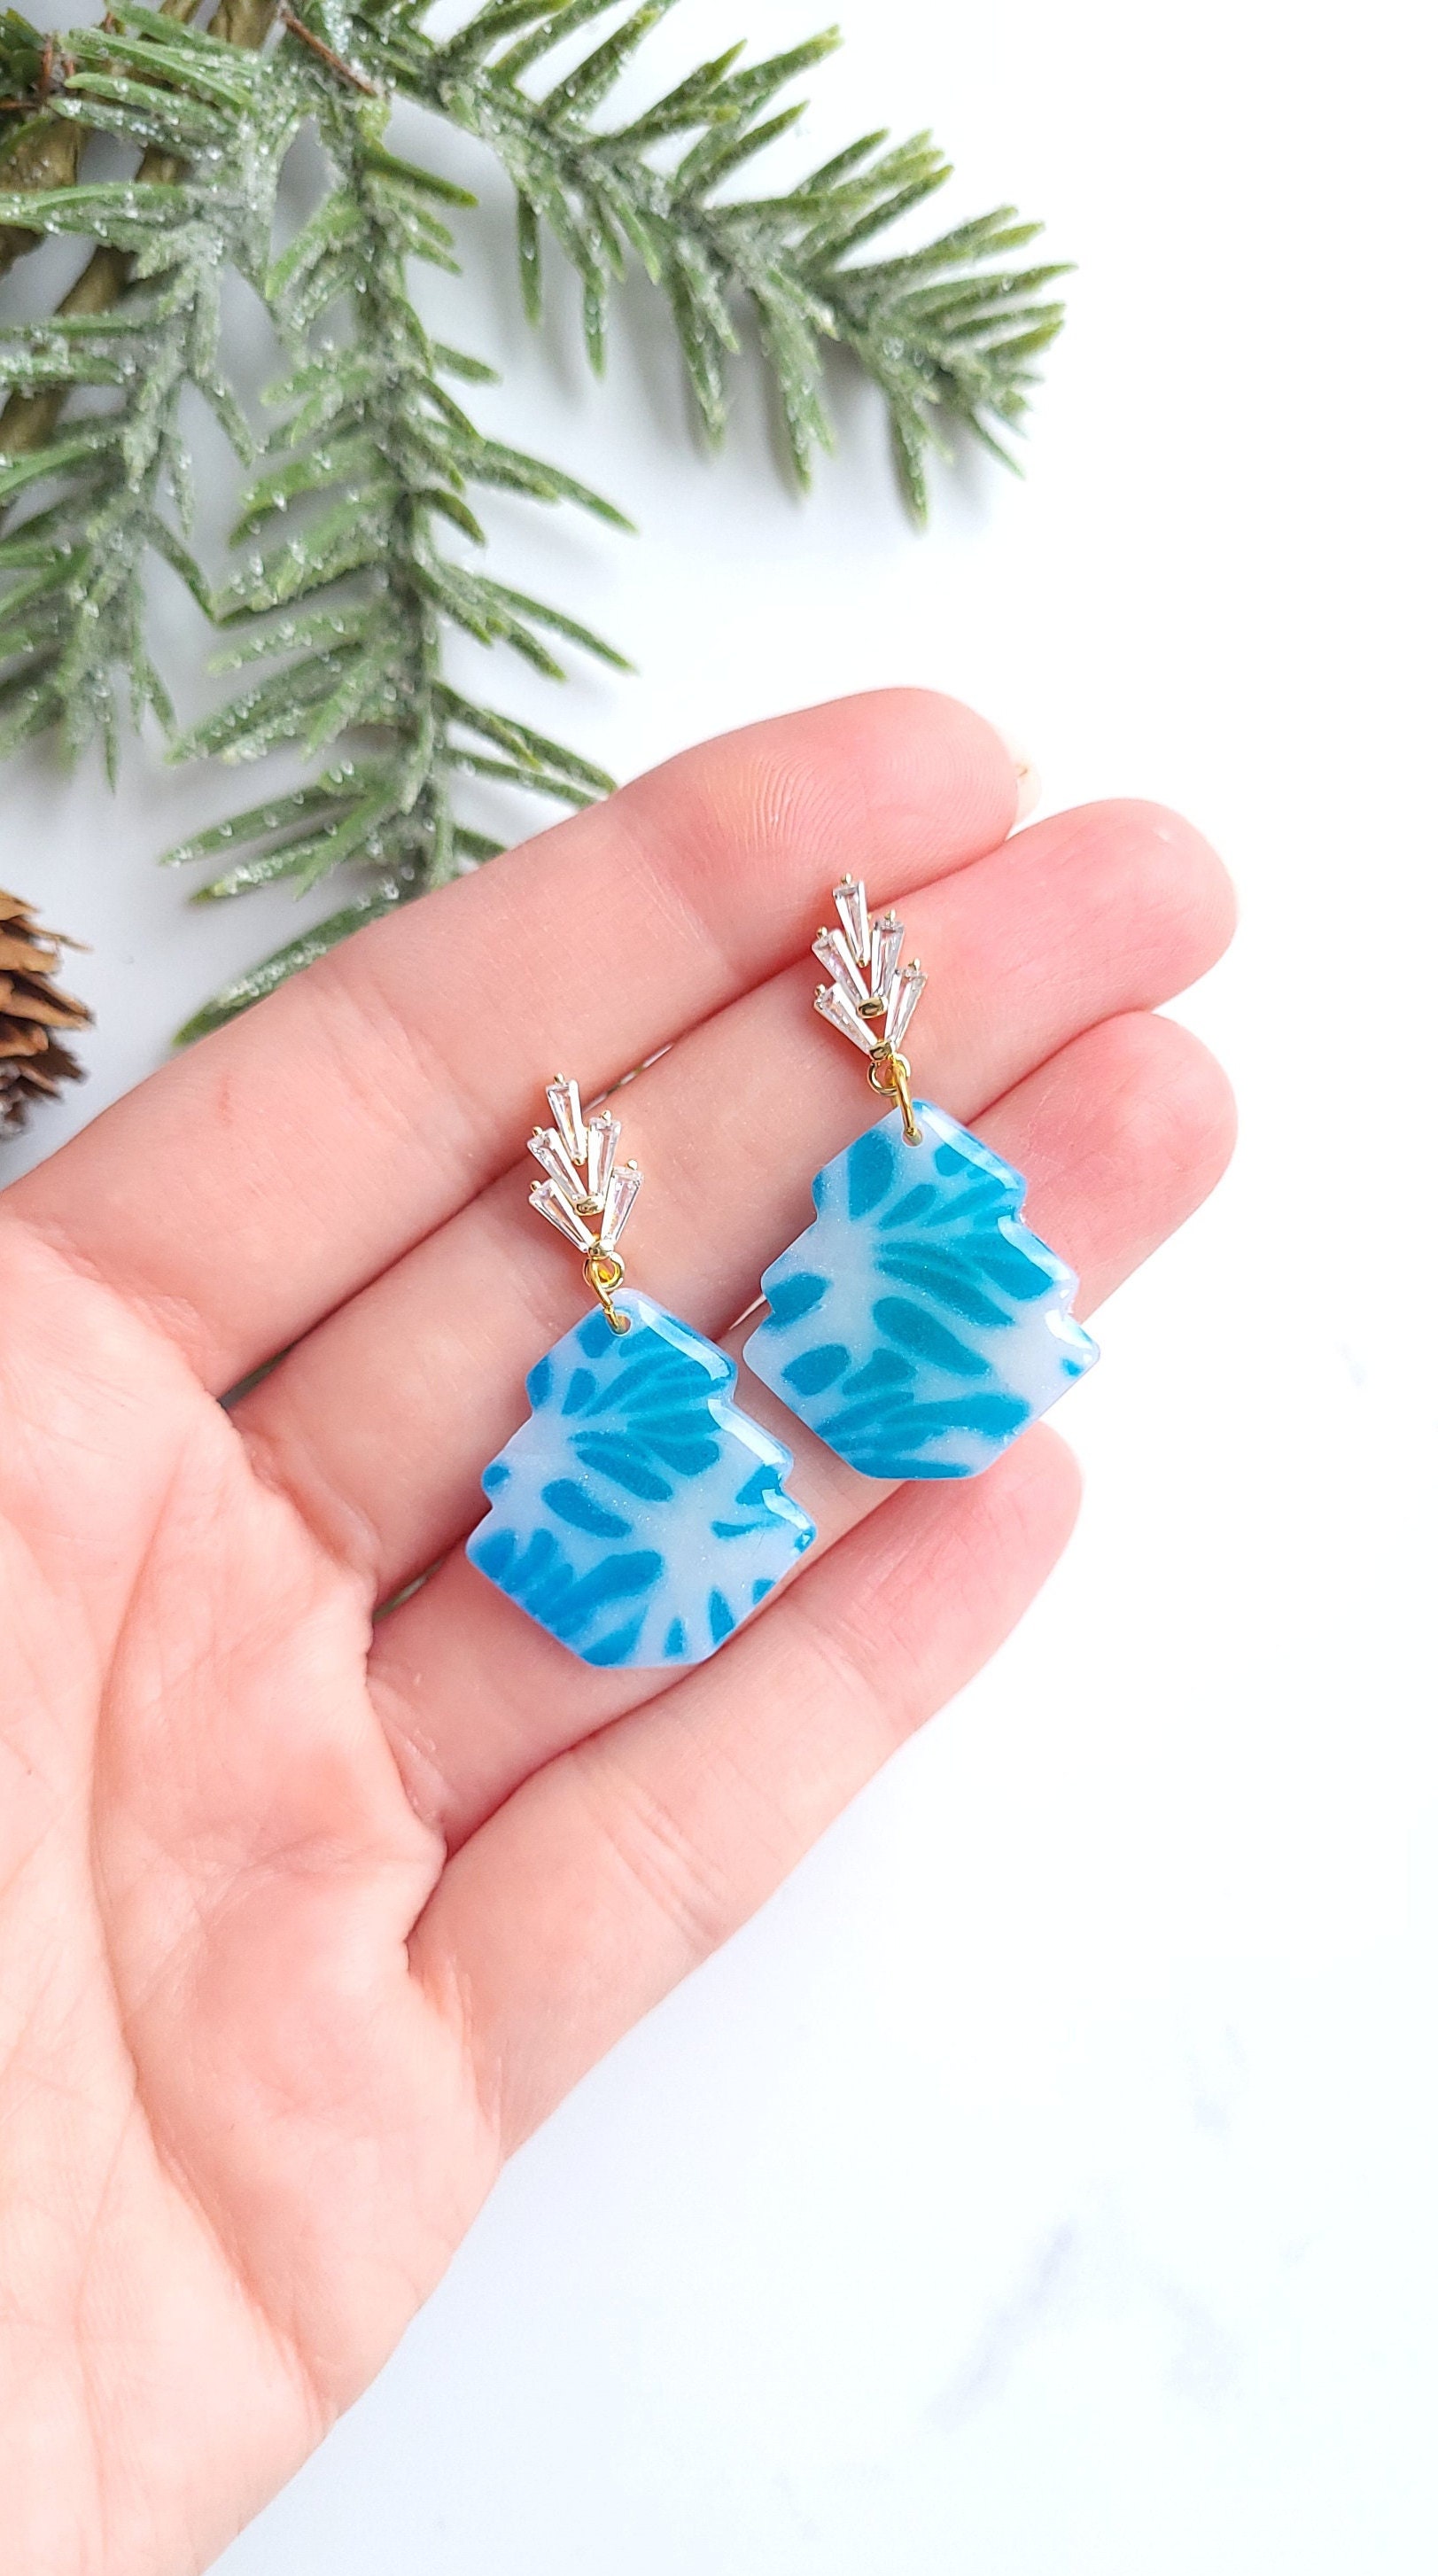 Turquoise/Blue Marble Earrings | Handmade Polymer Clay Statement Dangle